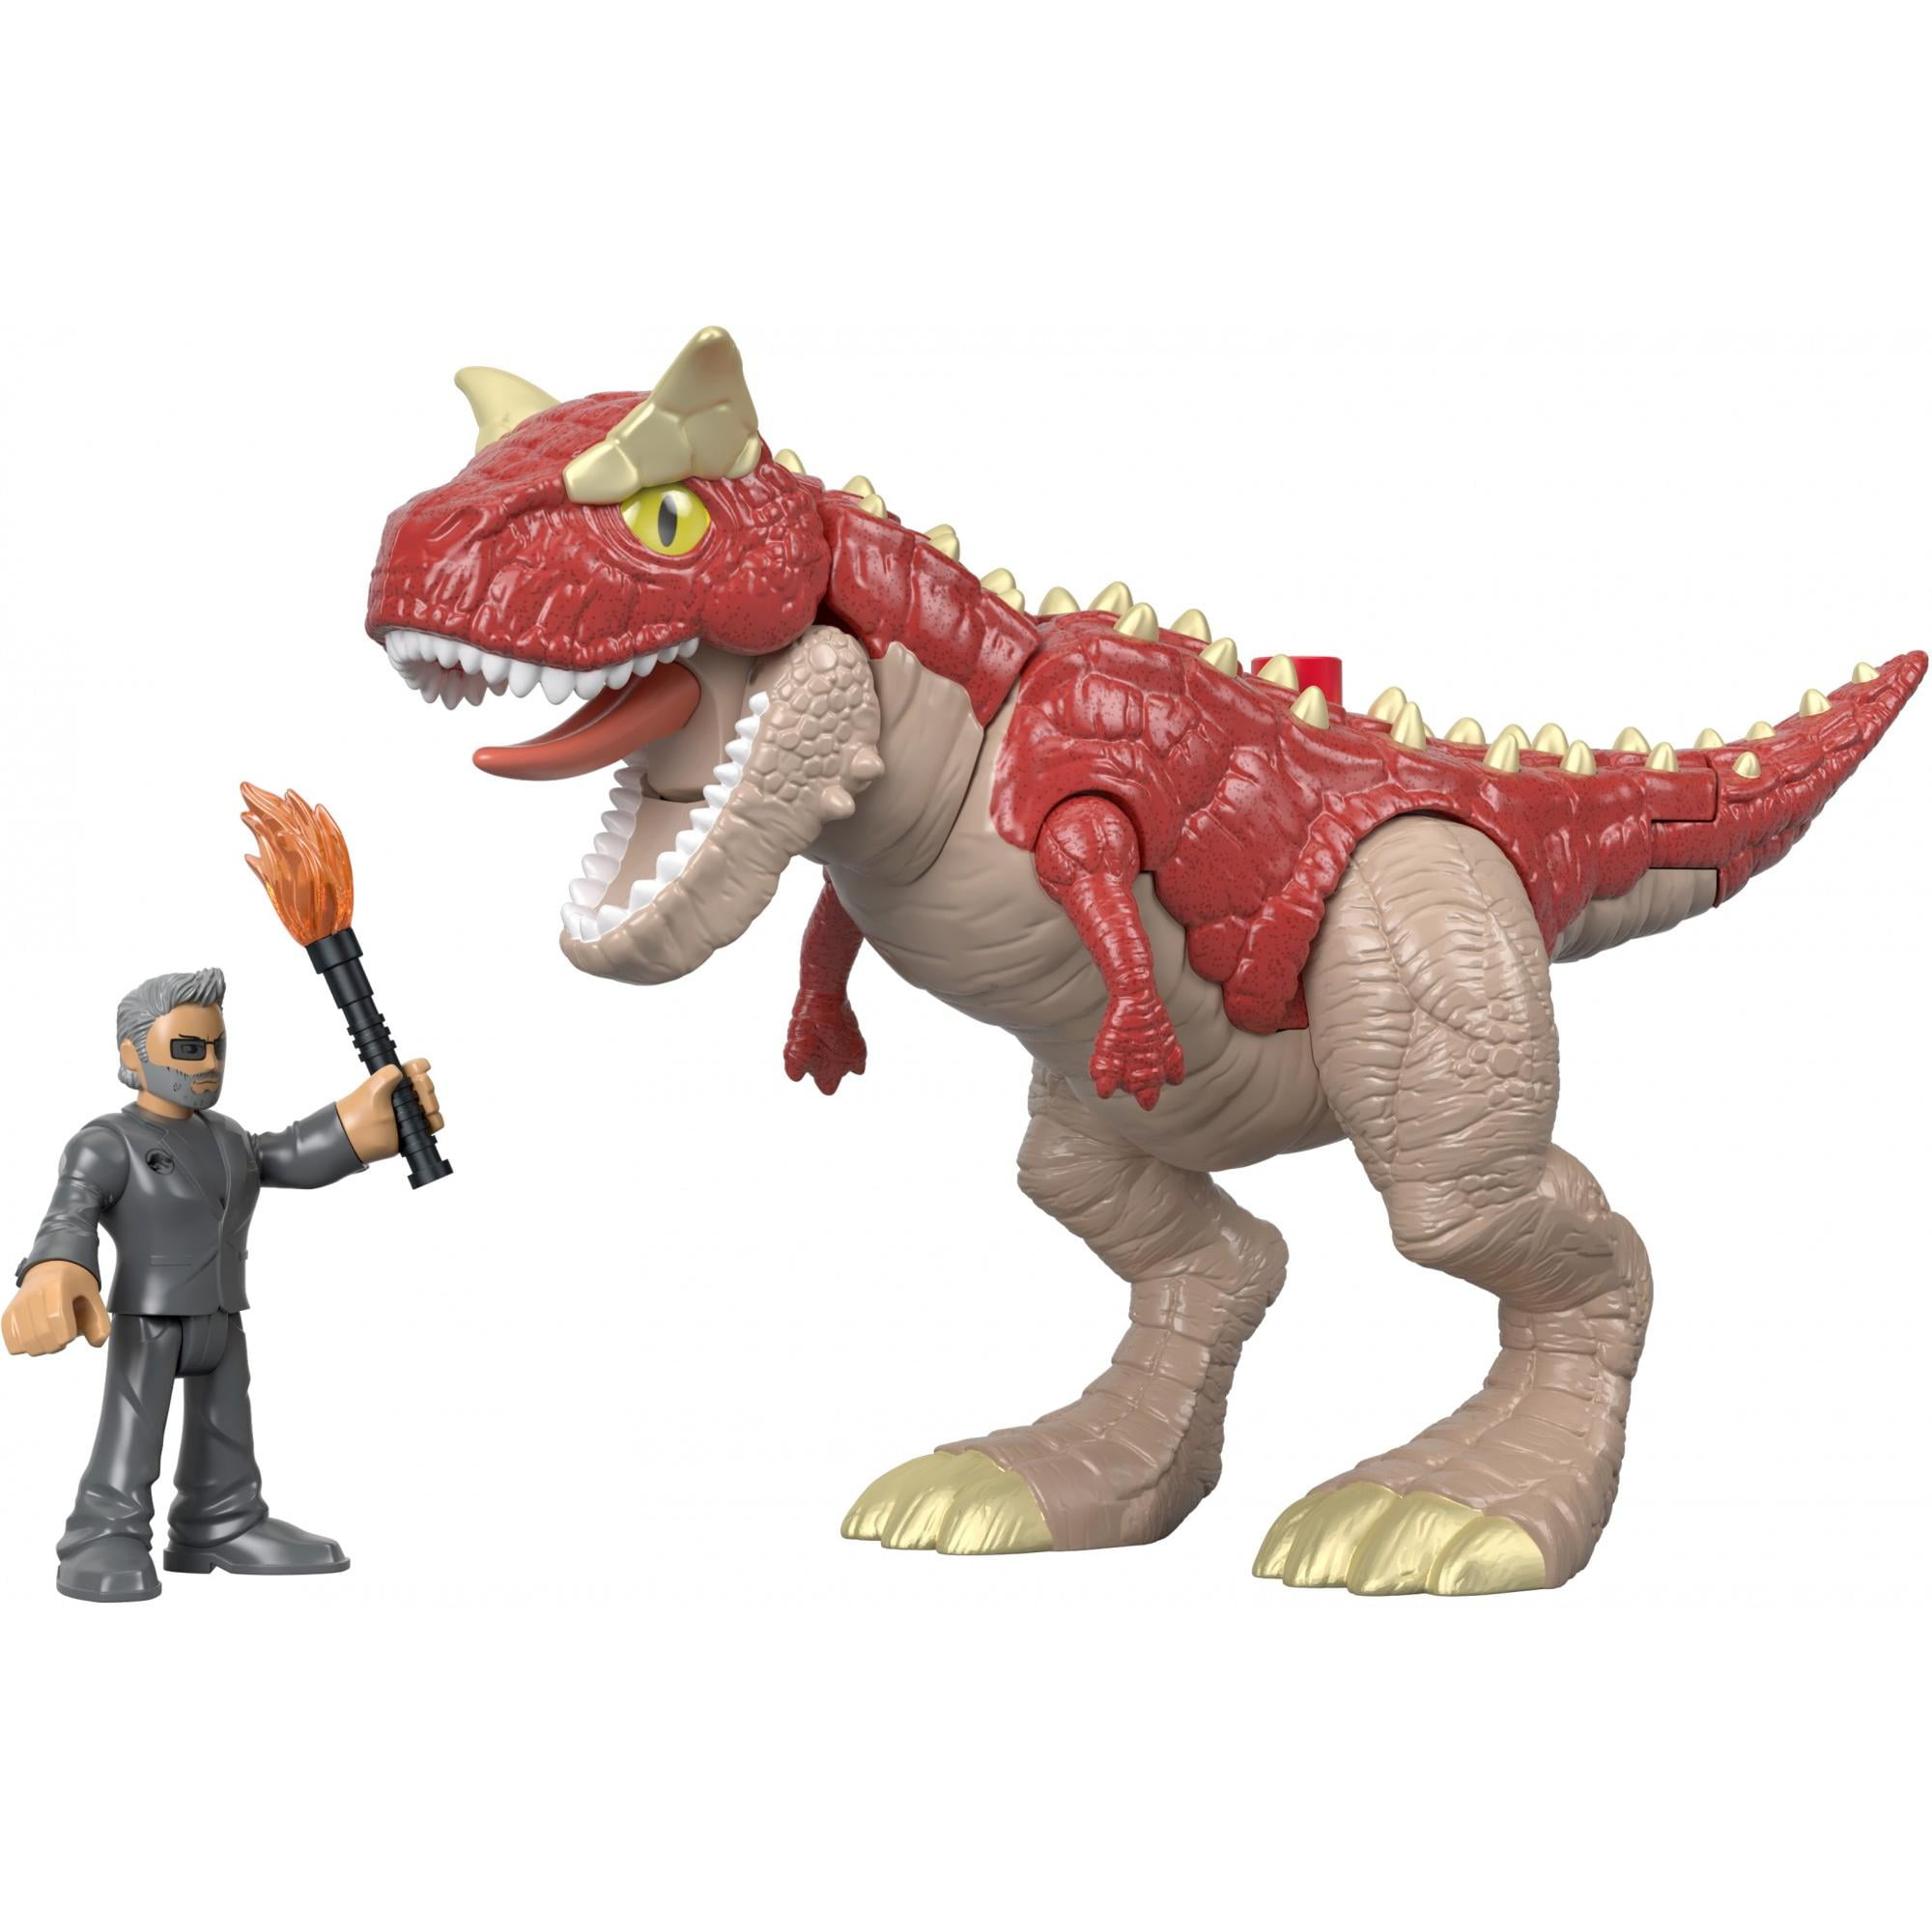 Imaginext Jurassic World Sub Dino Catcher Action Figure Playset for sale online 